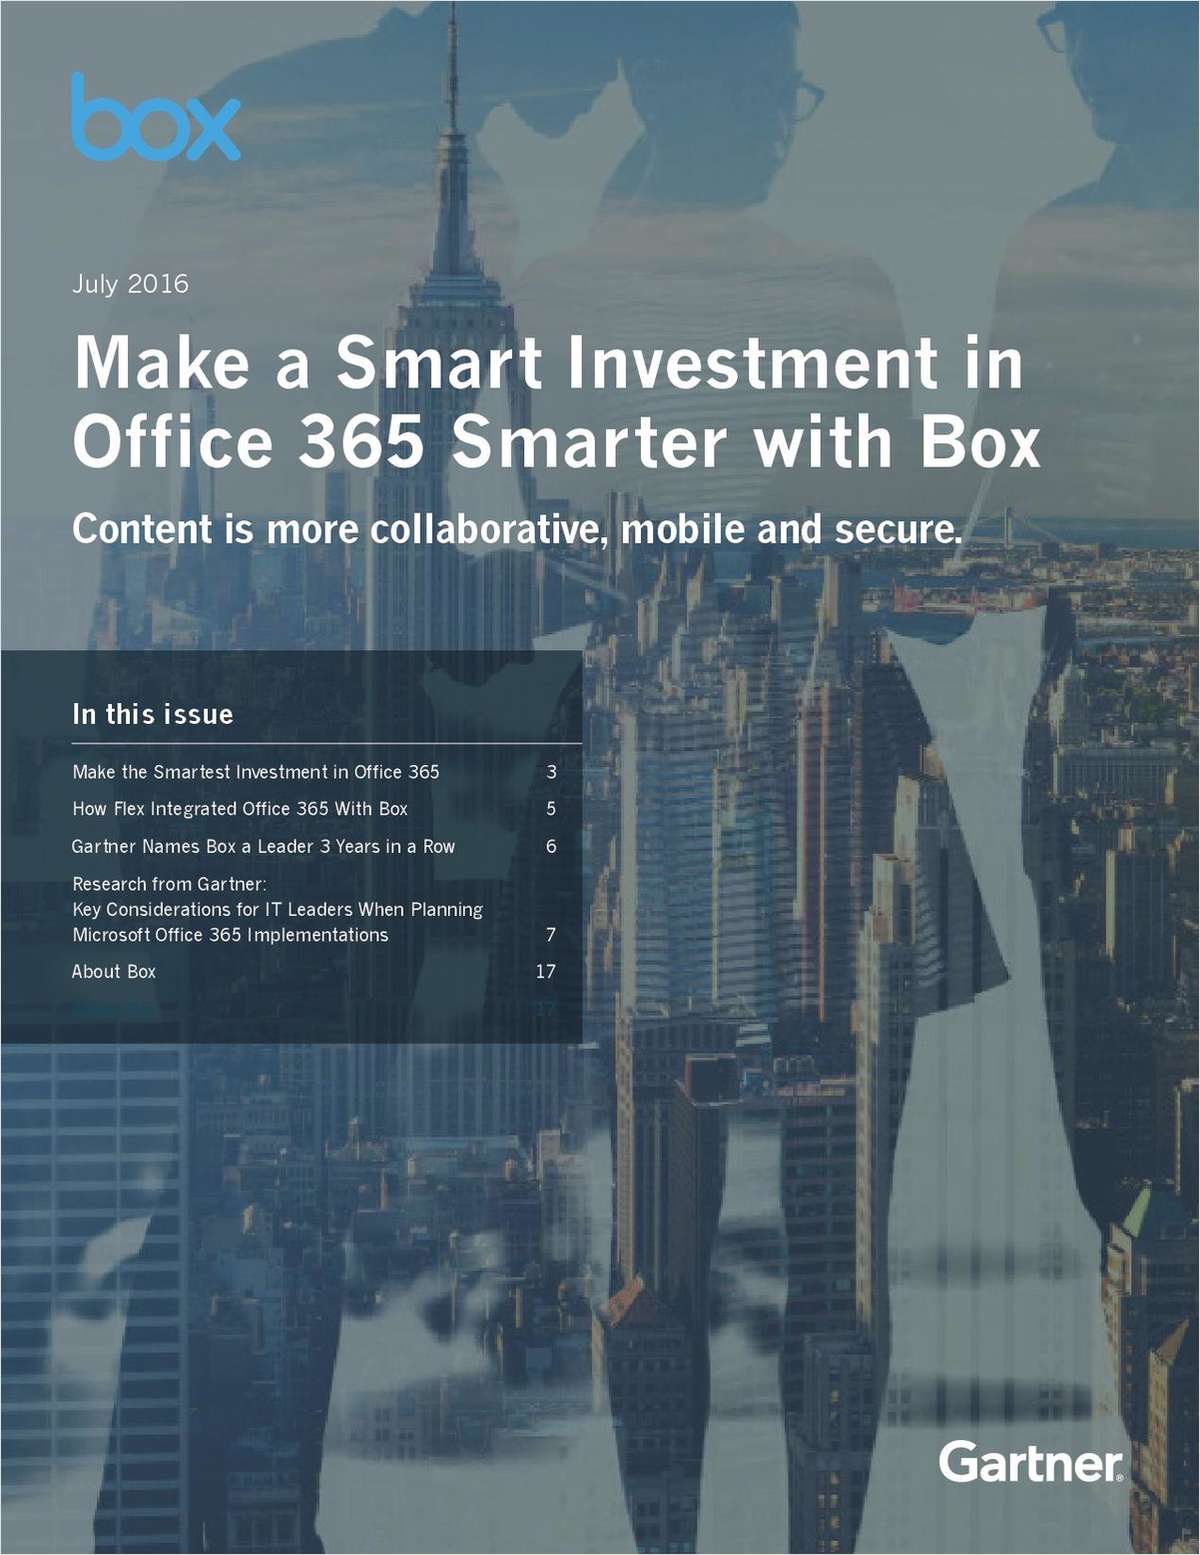 Make a Smarter Investment in Office 365 Smarter with Box